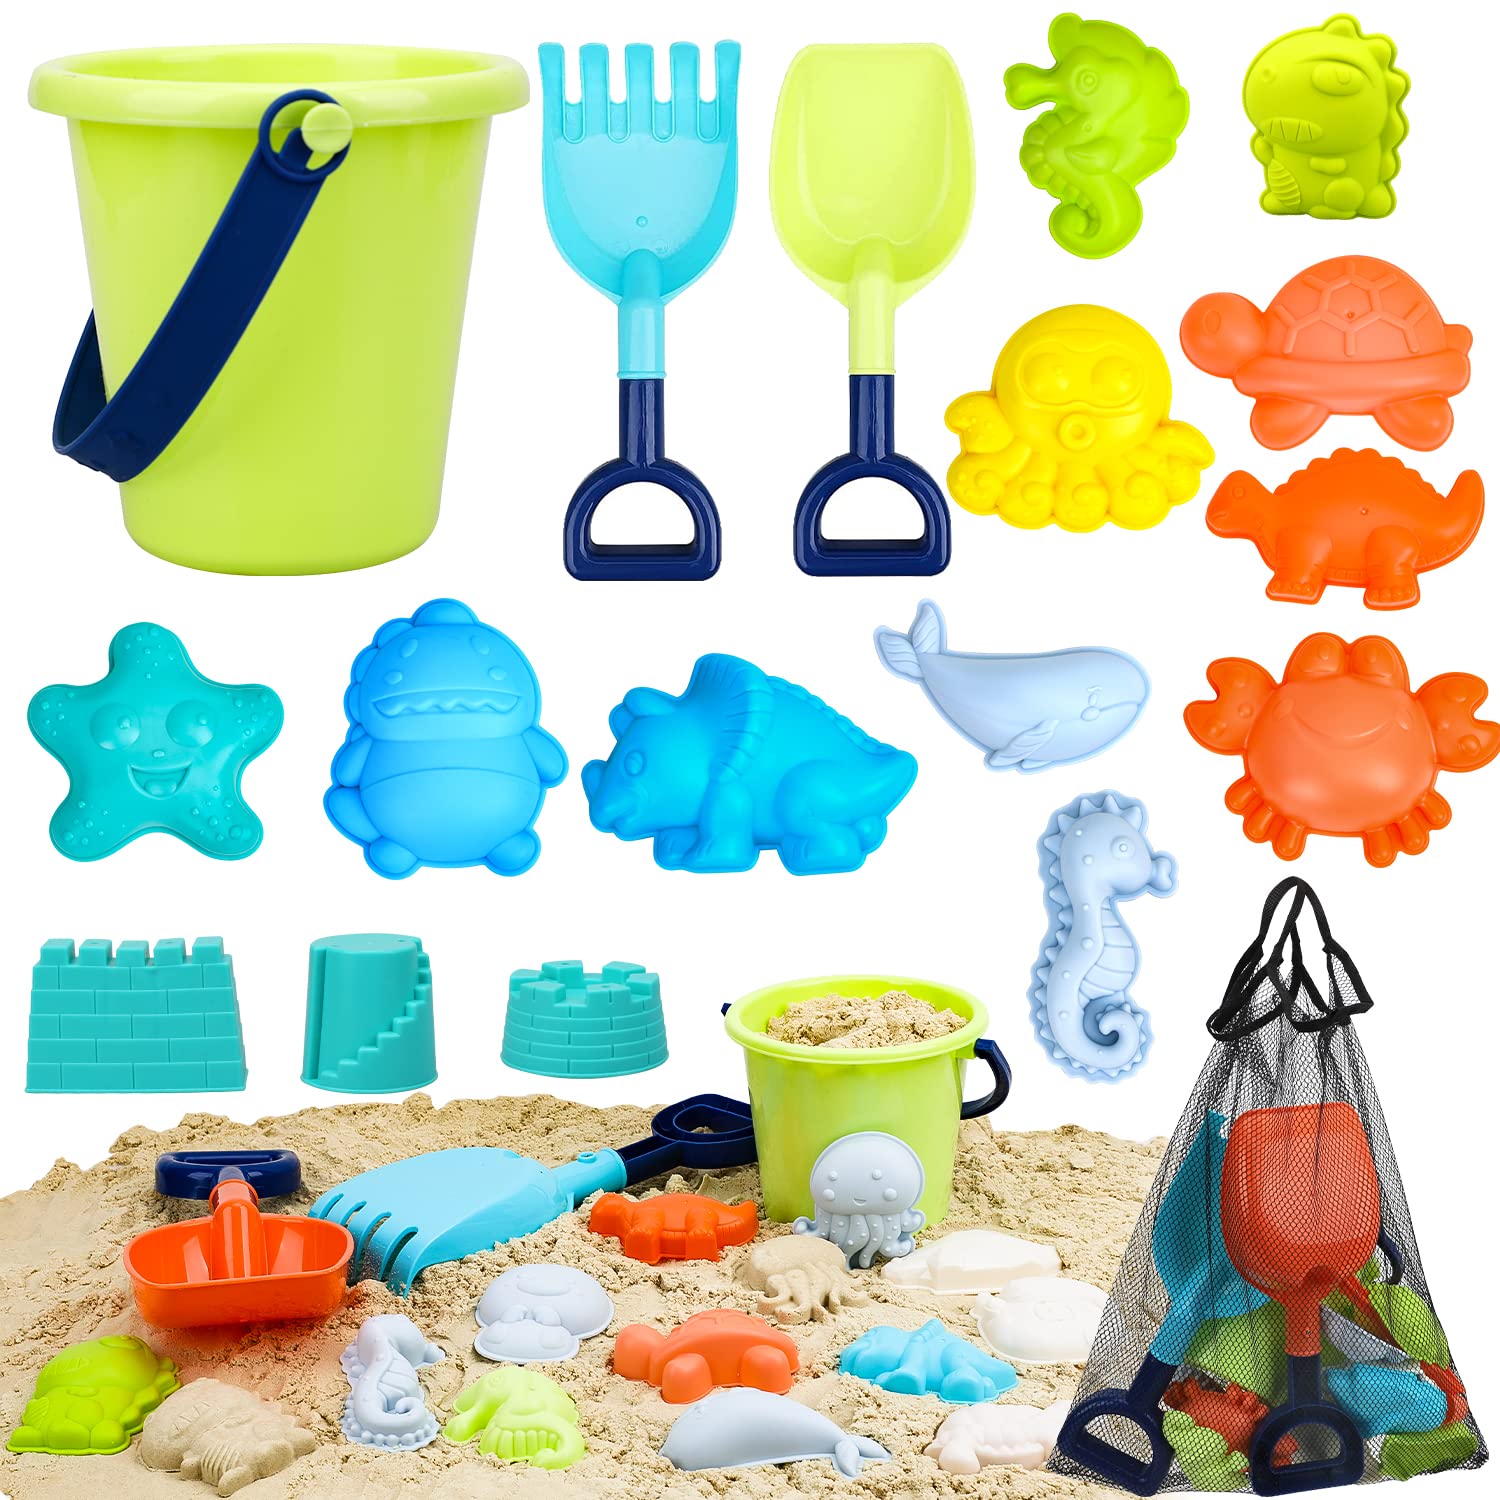 Toy Life Beach Toys For Kids Toddler, Kids Sand Toys Includes Beach Bucket, 2 Sand Shovels, Sand Castle Molds Toys With Mesh Bag